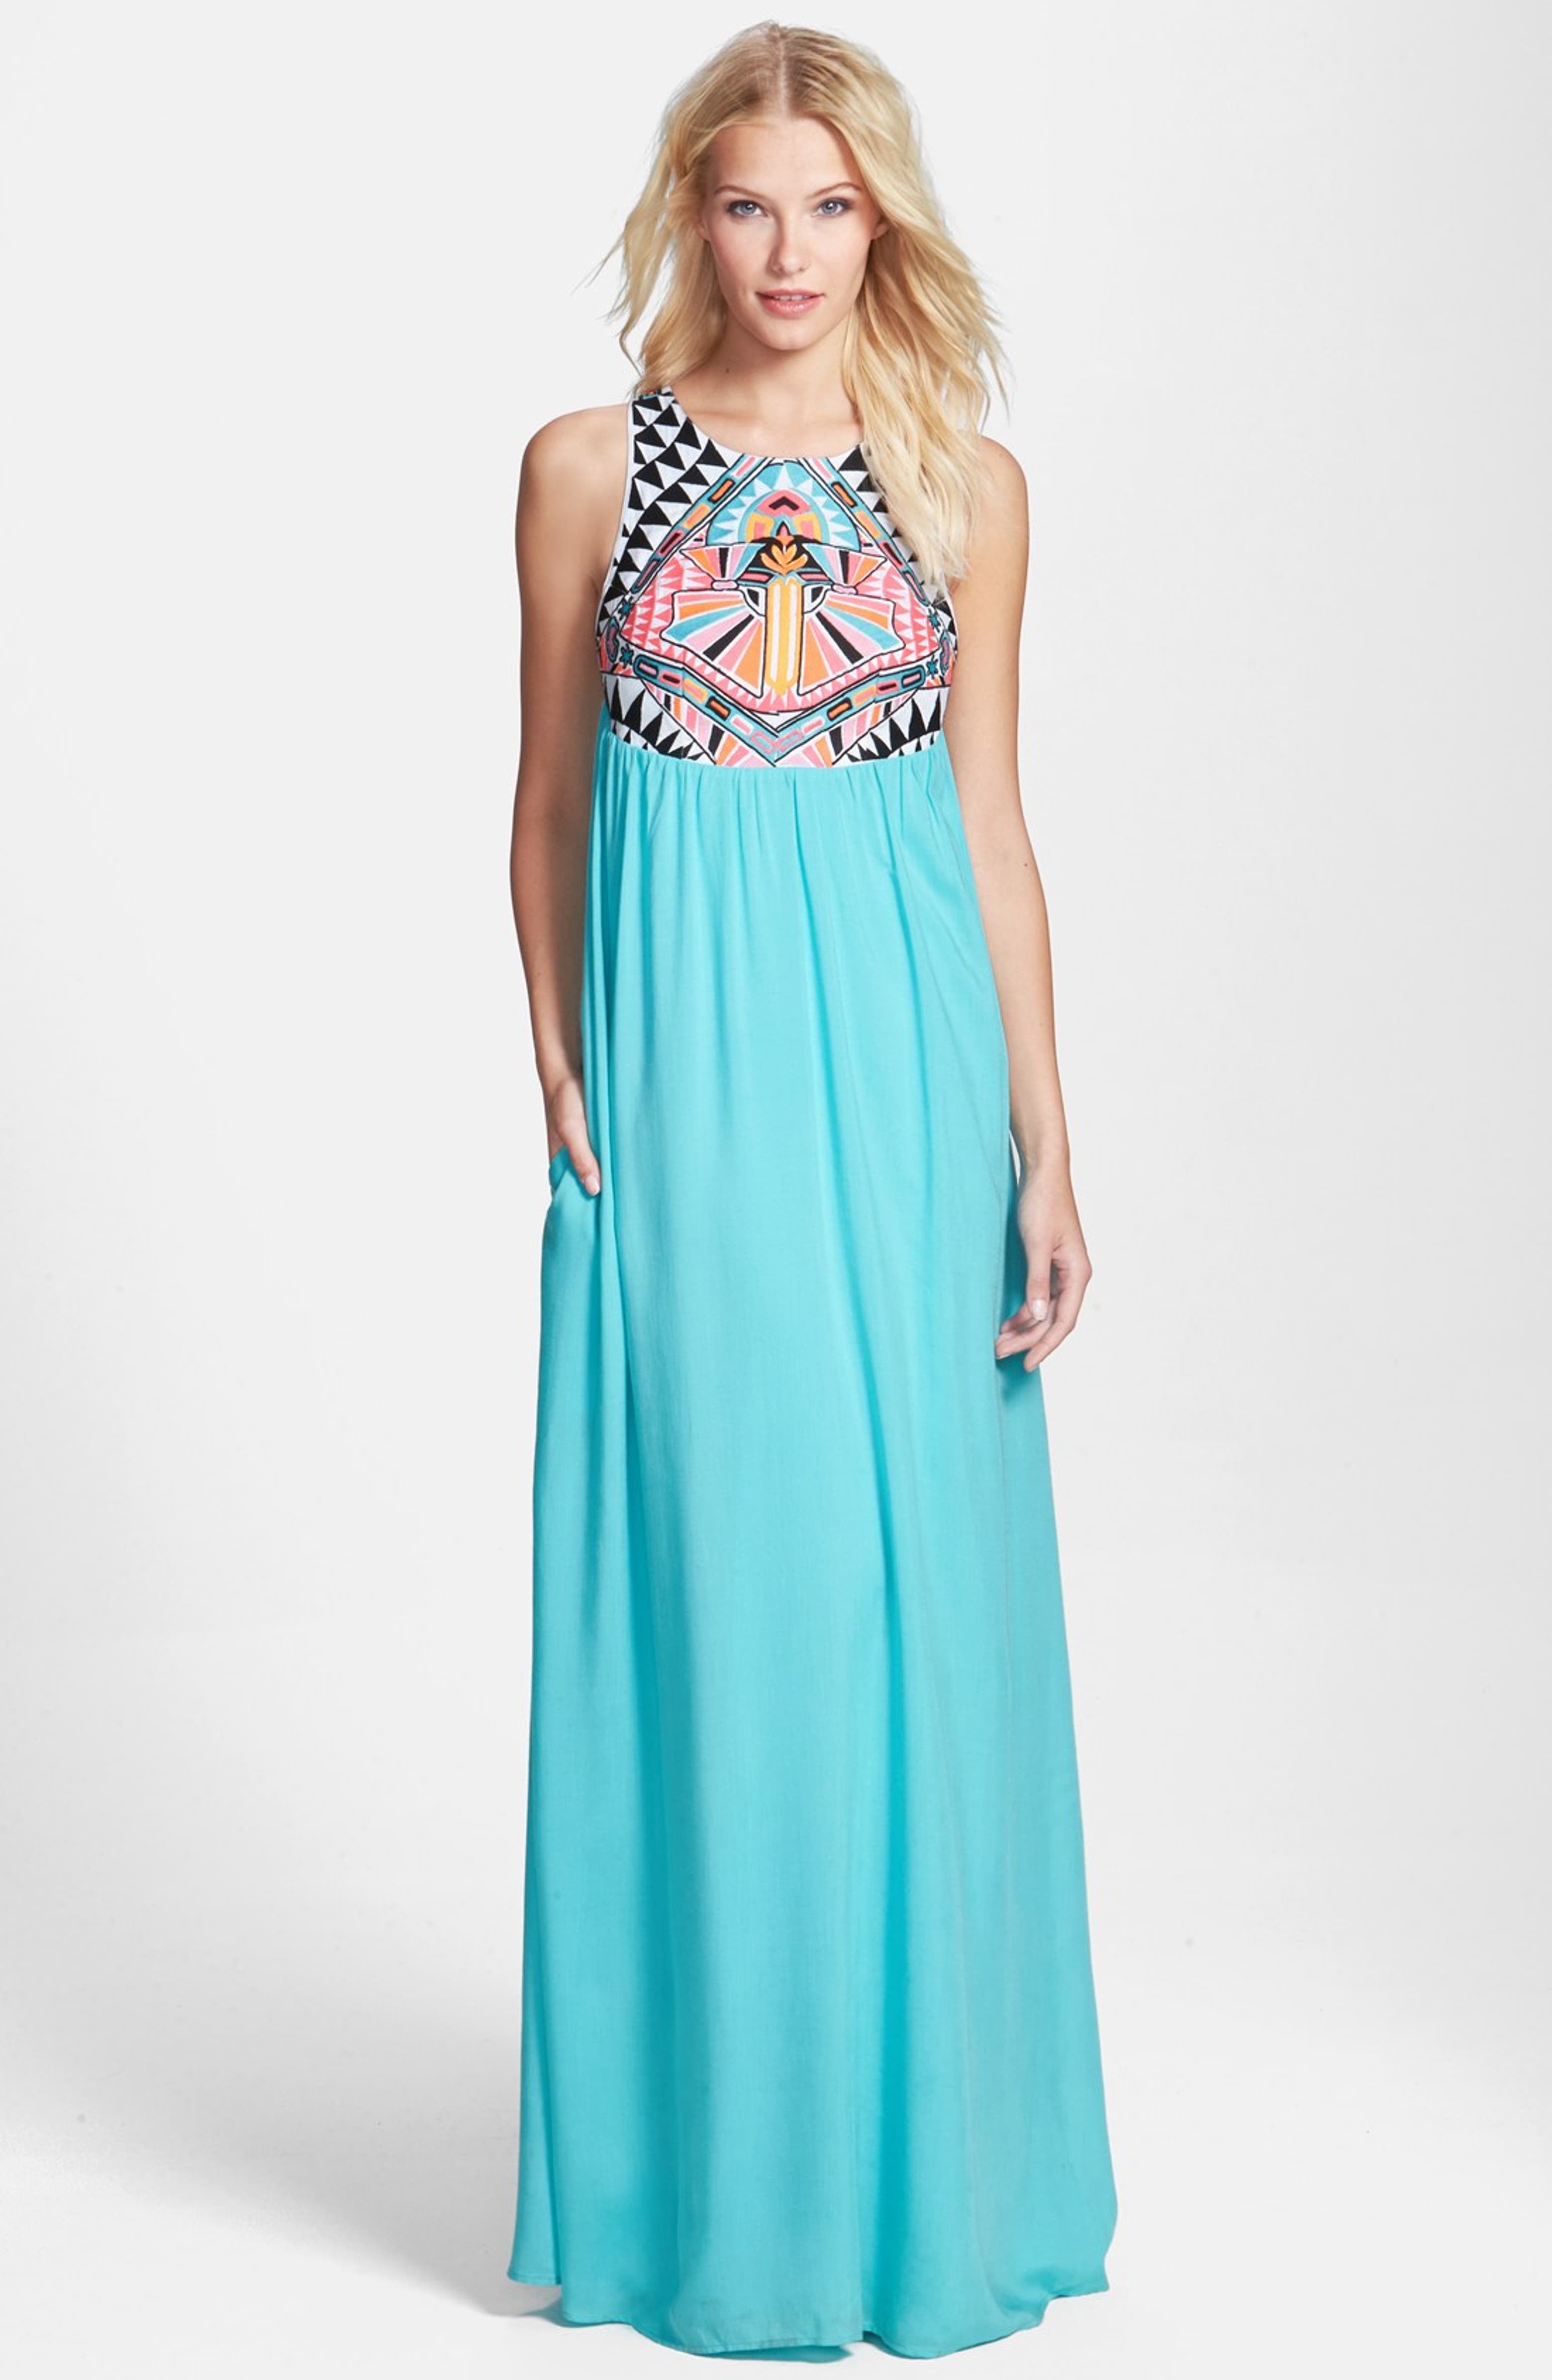 Mara Hoffman 'Cosmic Fountain' Embroidered Maxi Dress | Nordstrom